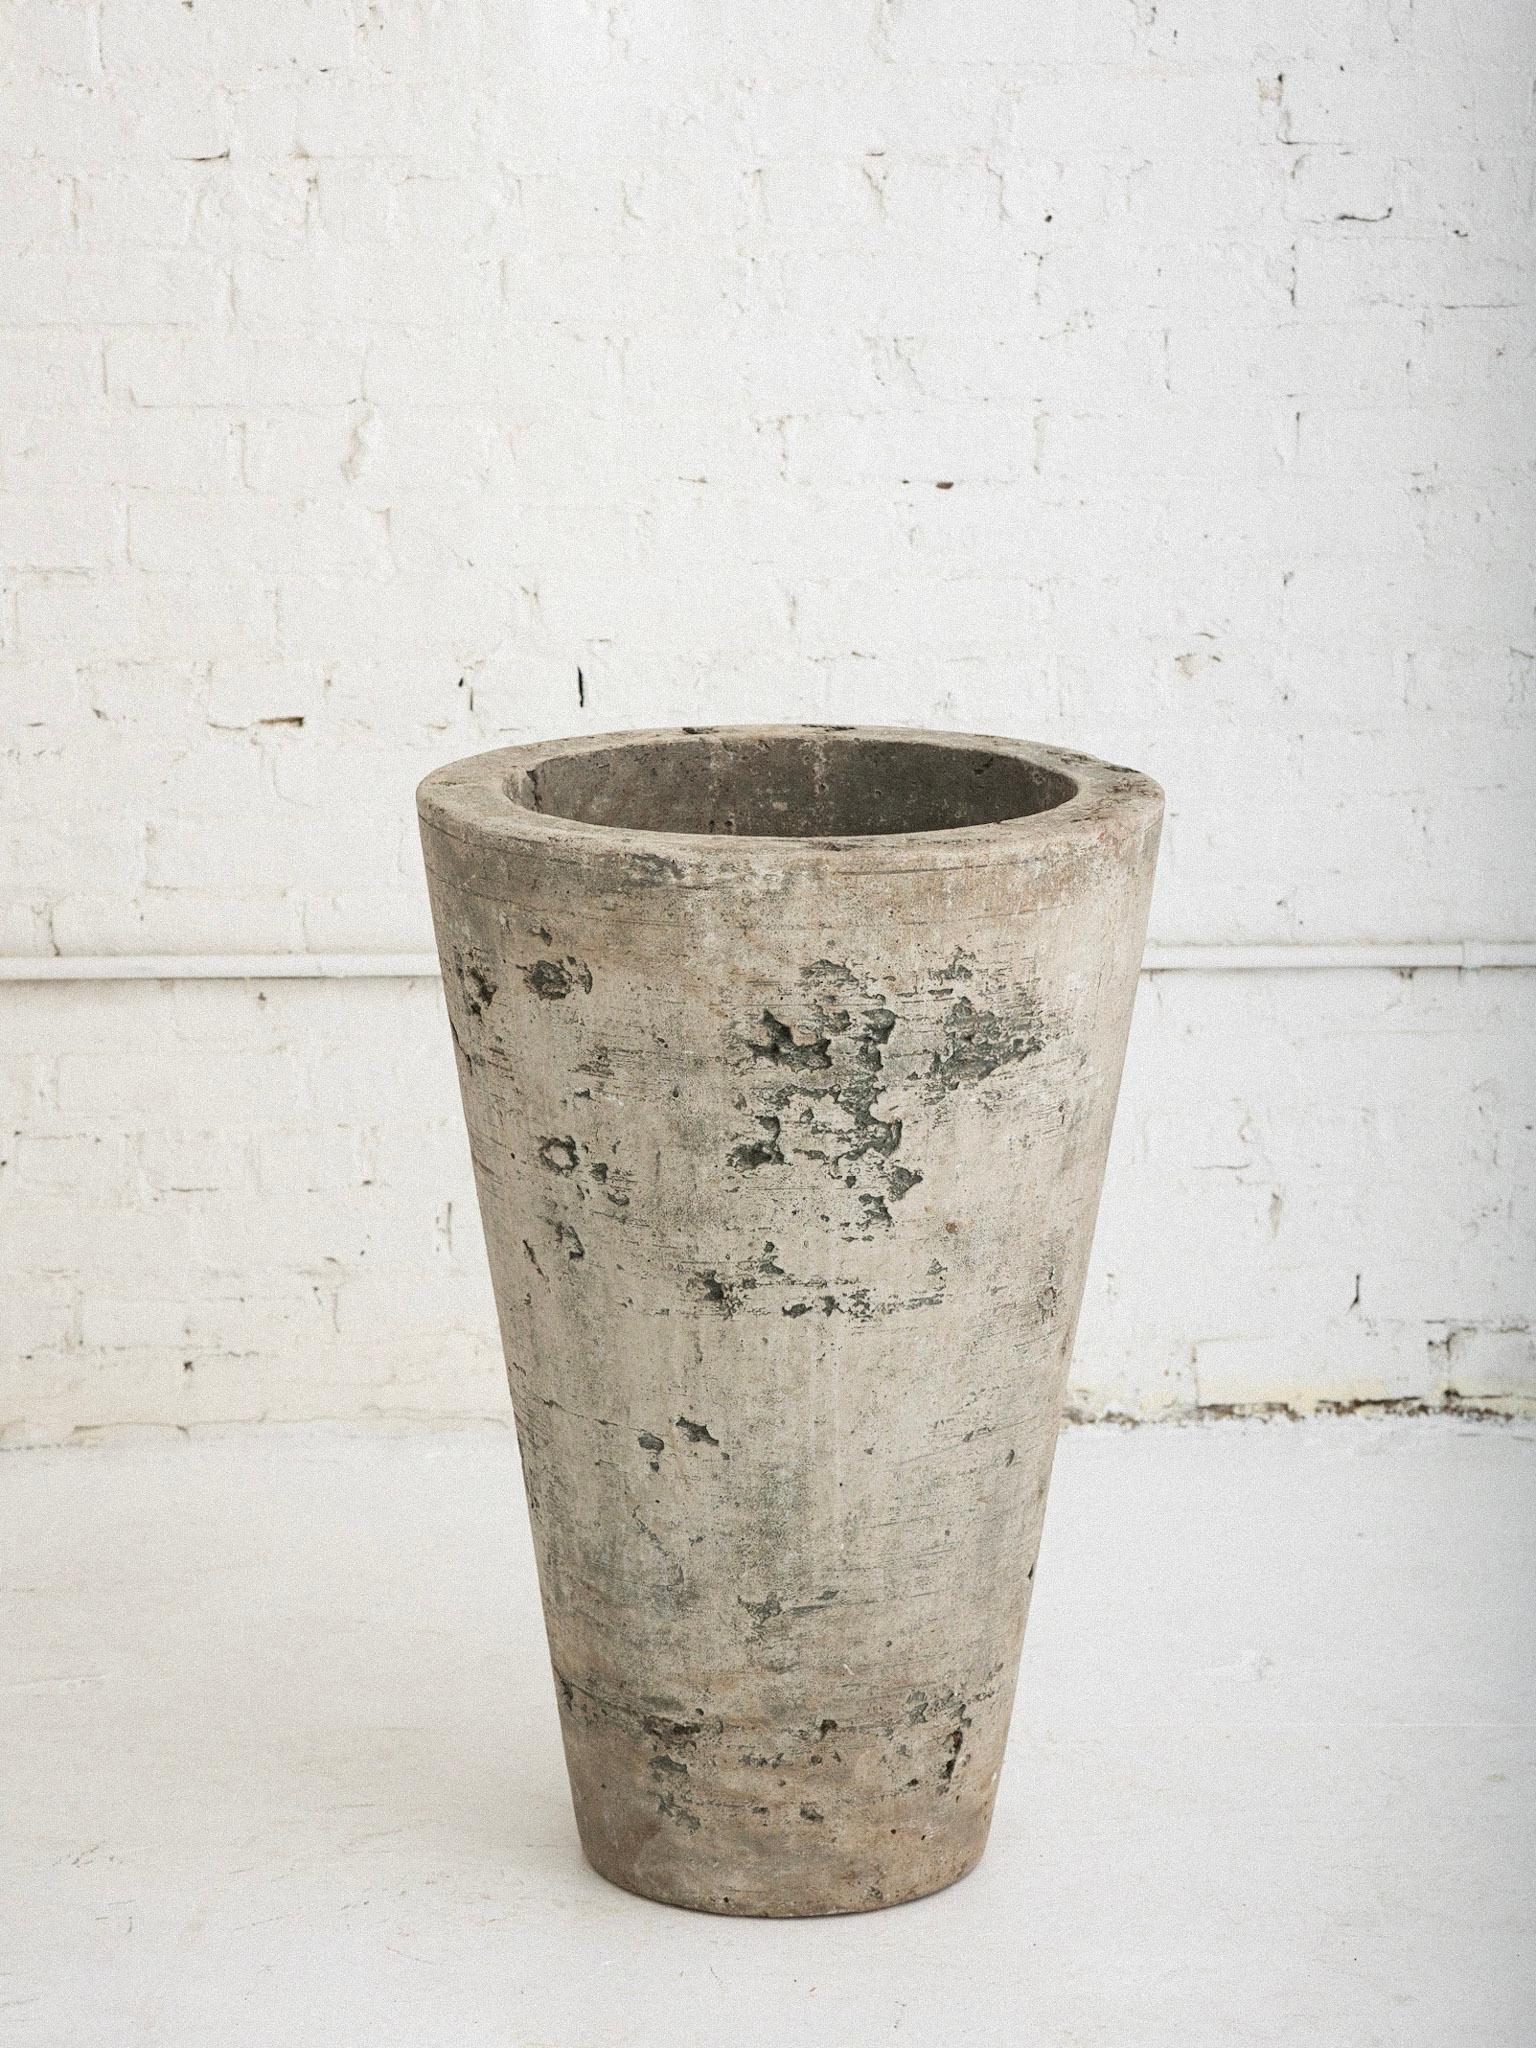 A large solid concrete cast stone planter. Tapered conical Silhouette. Textured surface with a weathered patina. Drainage hole inside. Solid and heavy, circa 2005.